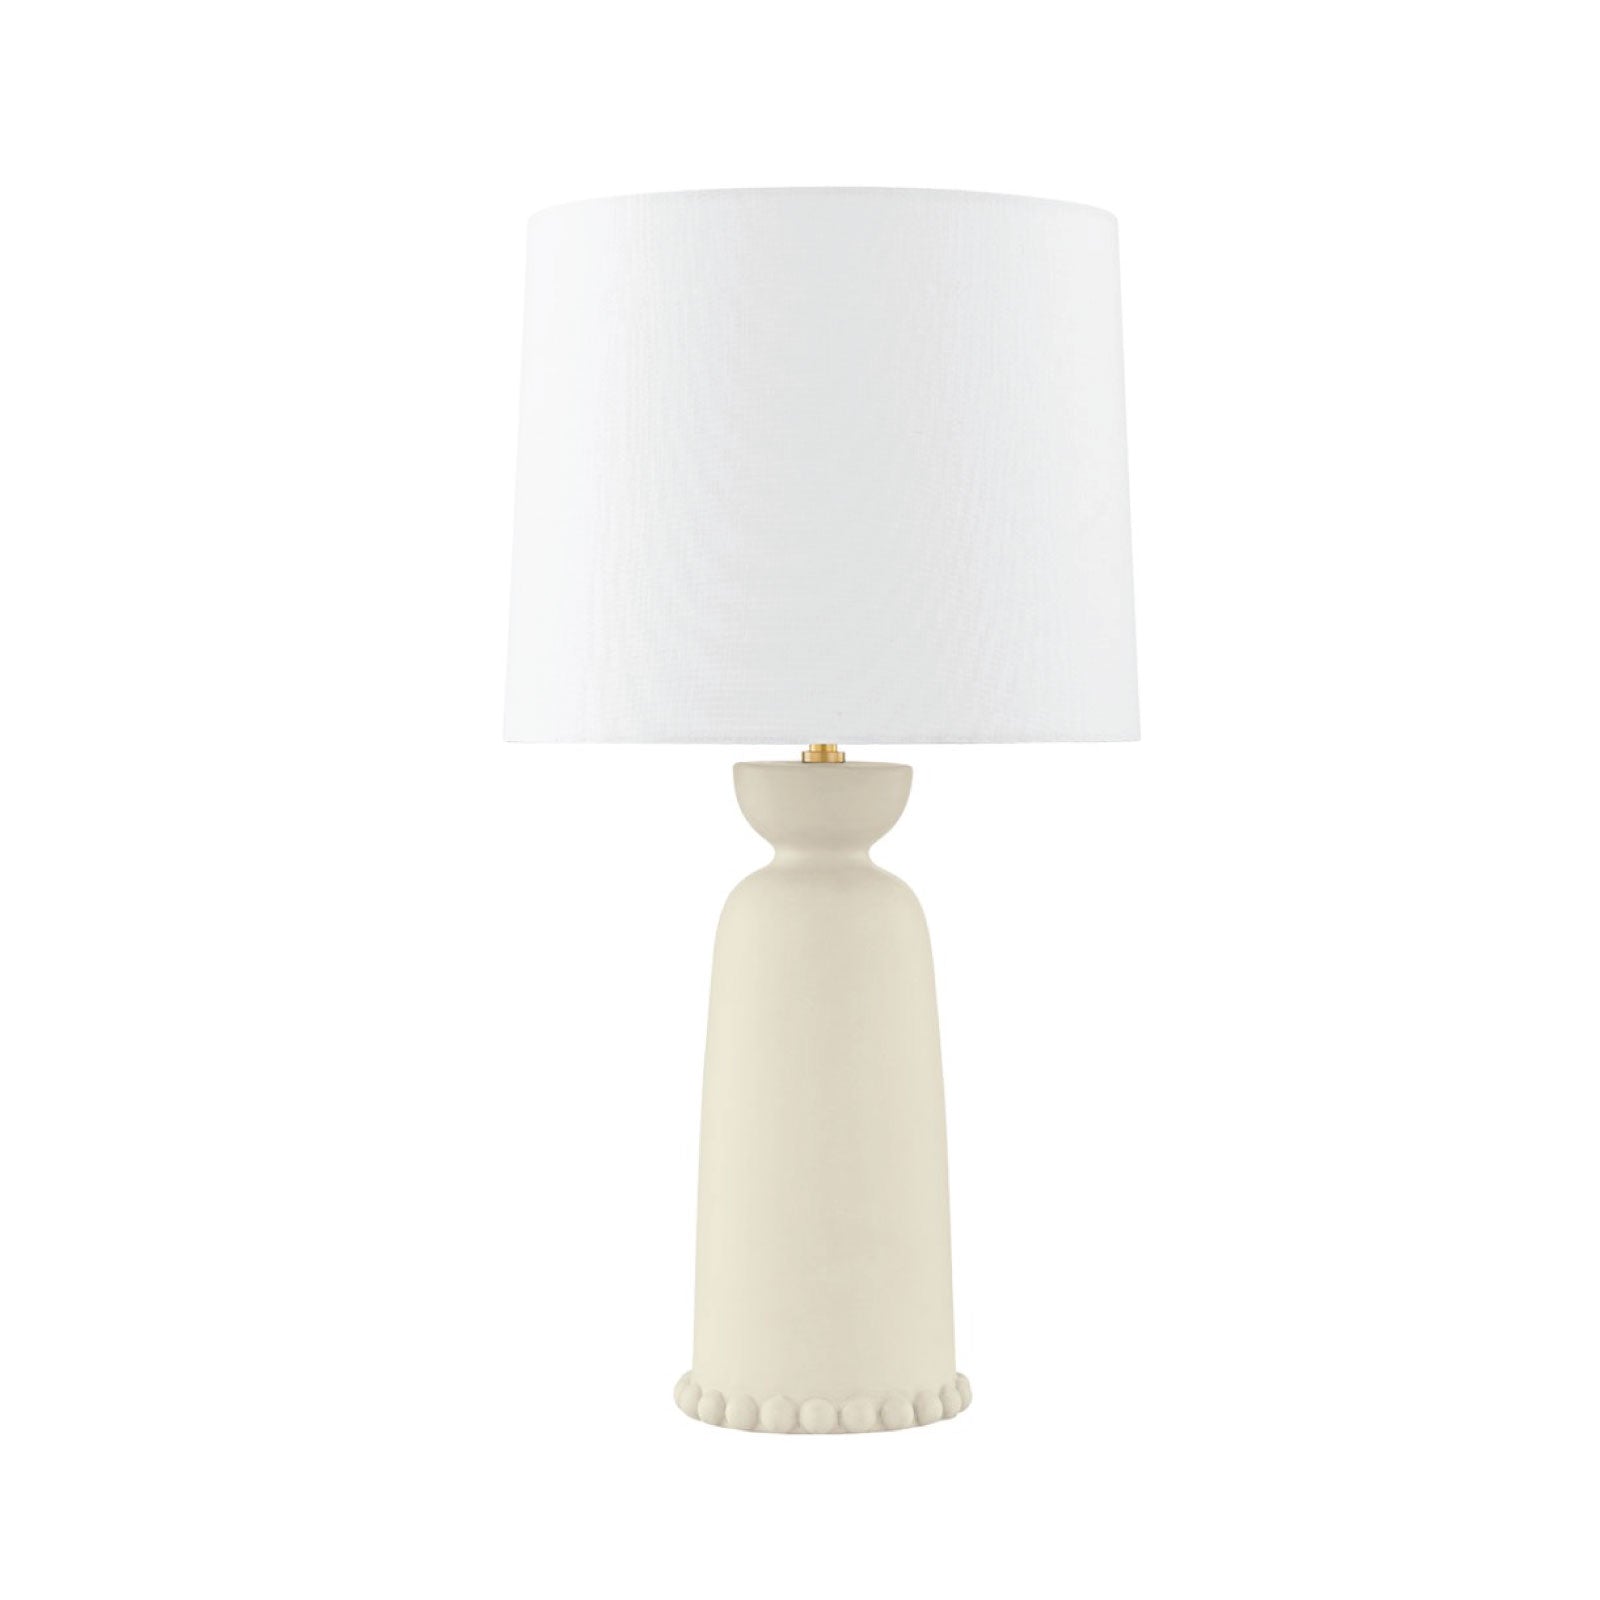 Ceramic table light with white lamp shade